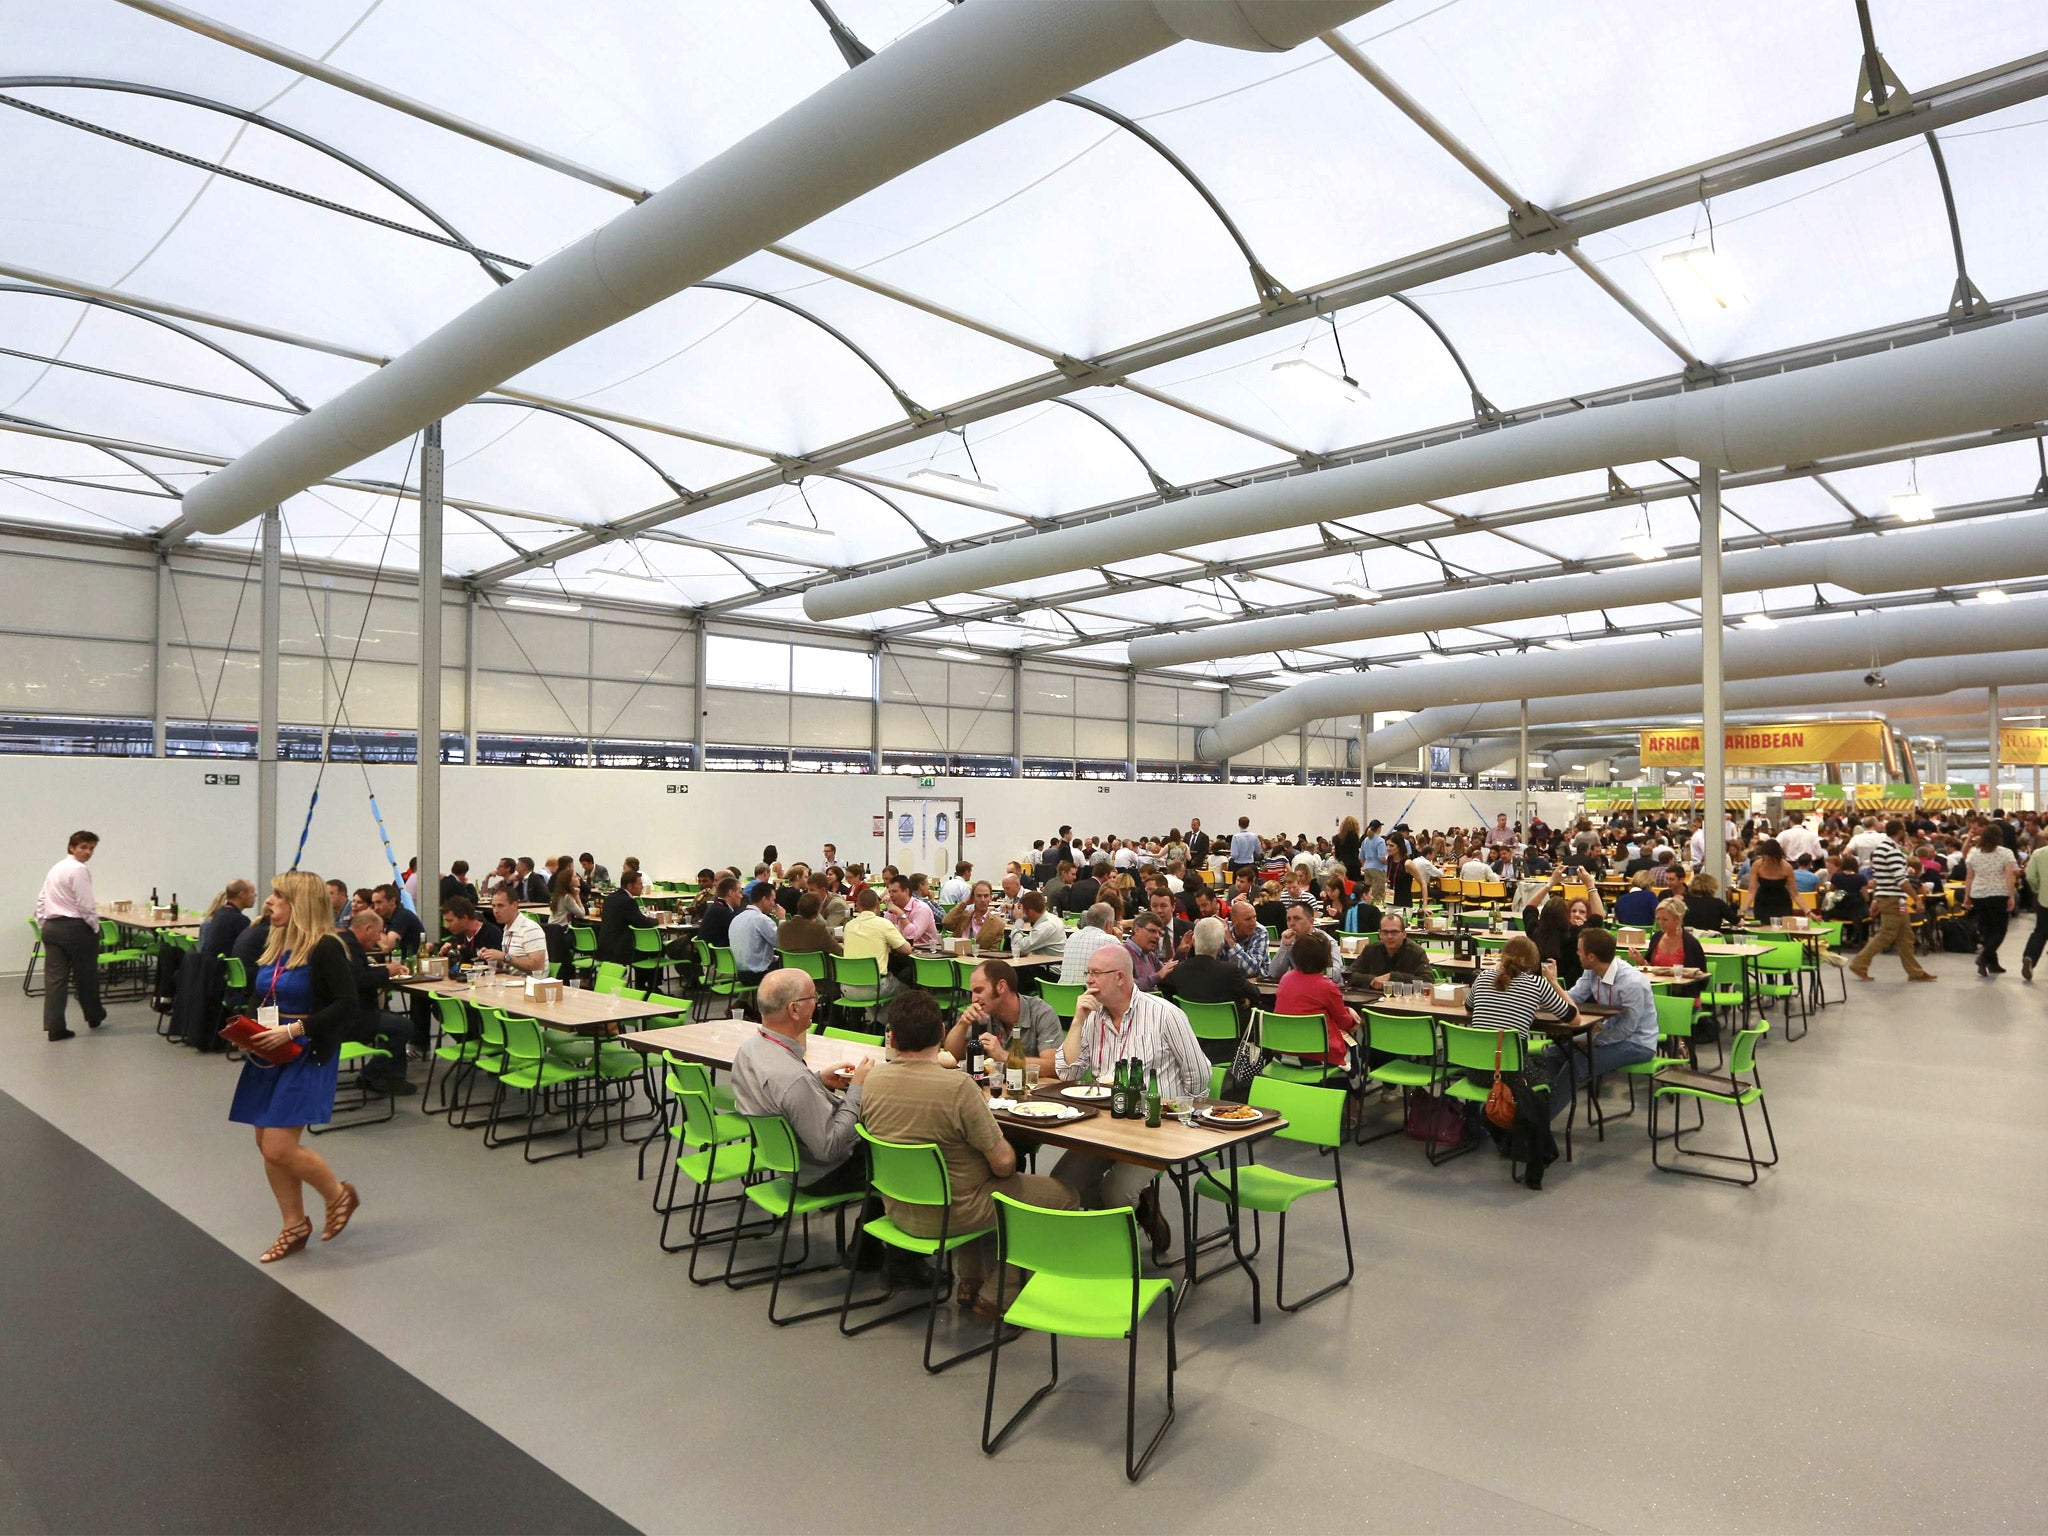 Lytchett Minster's new arts block was formerly a dining hall in the Olympic Village